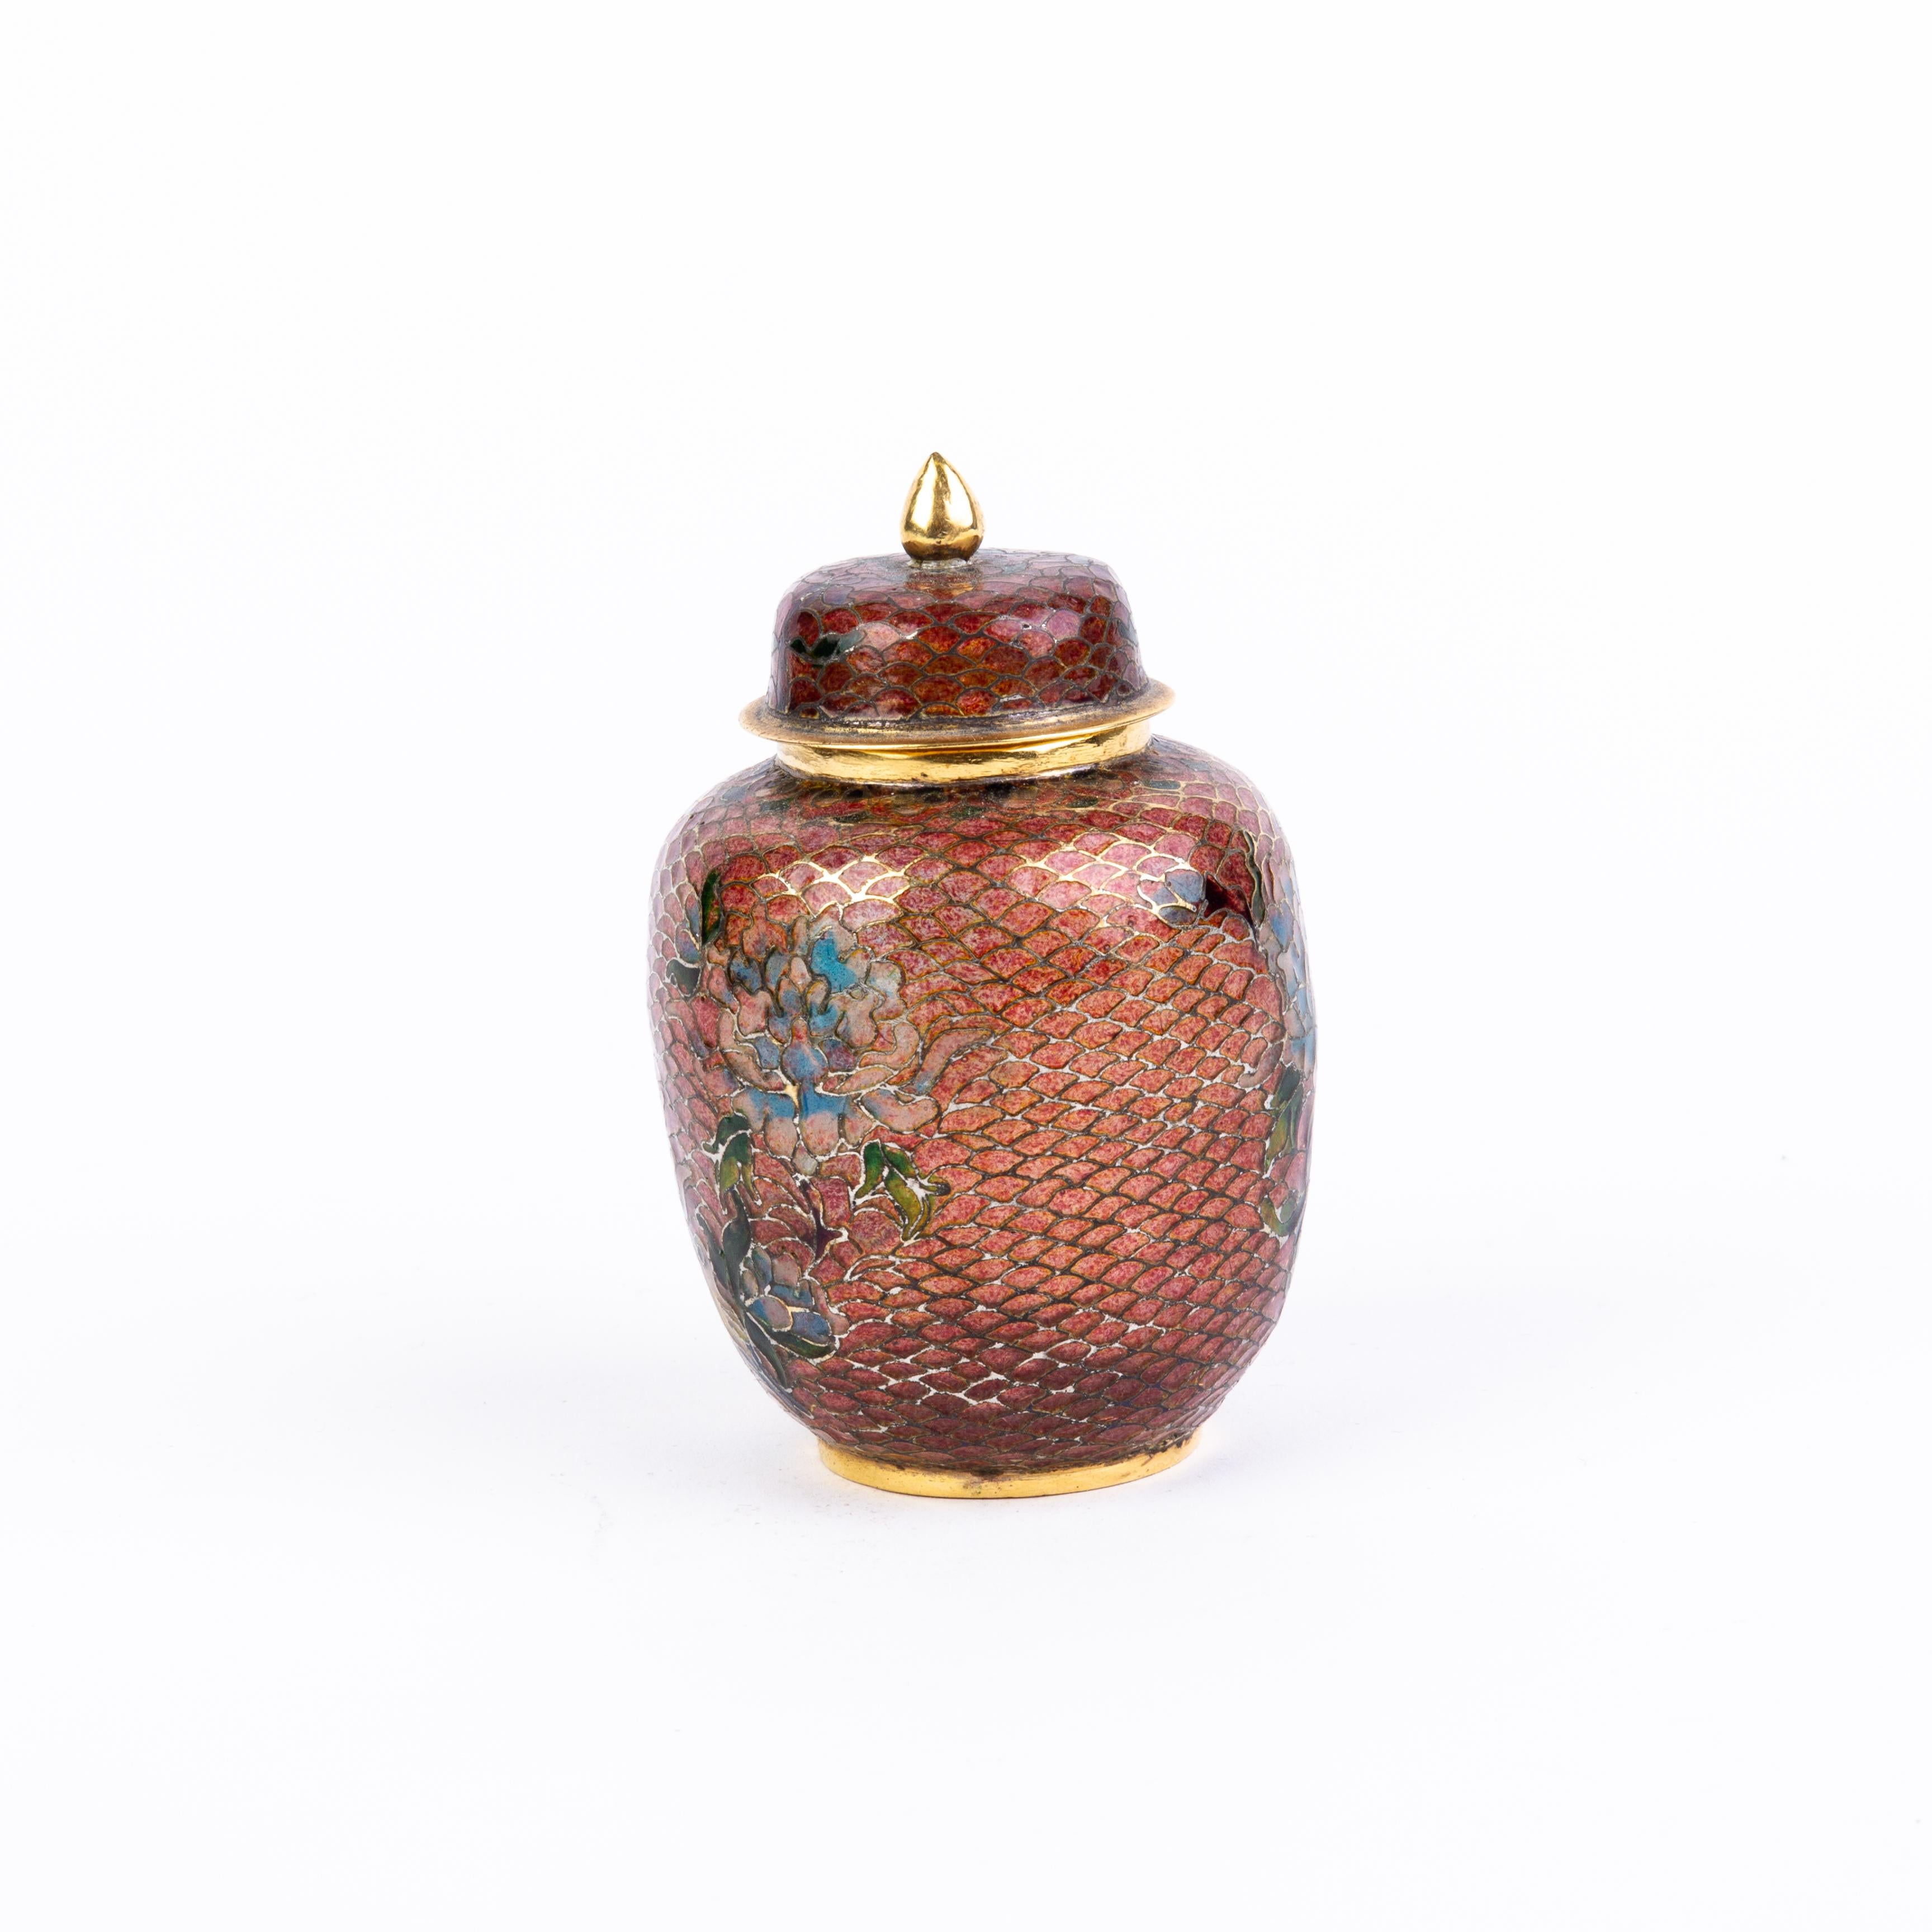 Chinese Imperial Style Plique a Jour Glass Inlaid Lidded Jar 
Good condition 
From a private collection.
Free international shipping.